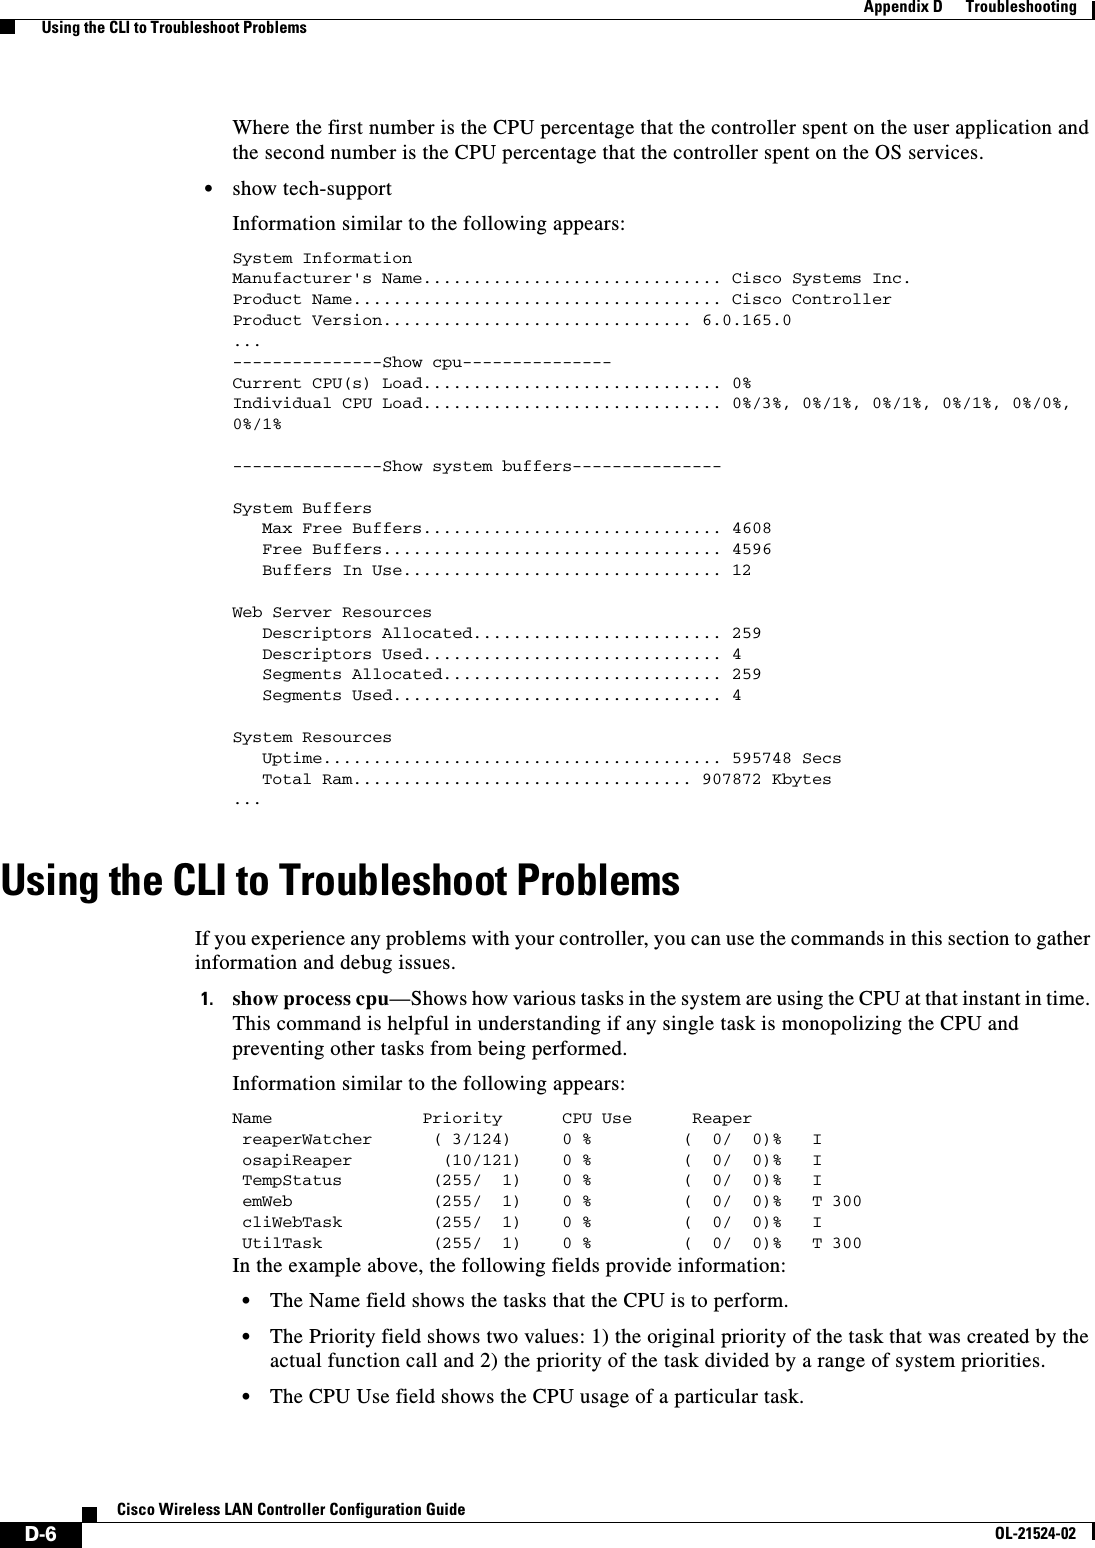  D-6Cisco Wireless LAN Controller Configuration GuideOL-21524-02Appendix D      Troubleshooting  Using the CLI to Troubleshoot ProblemsWhere the first number is the CPU percentage that the controller spent on the user application and the second number is the CPU percentage that the controller spent on the OS services.  • show tech-supportInformation similar to the following appears:System InformationManufacturer&apos;s Name.............................. Cisco Systems Inc.Product Name..................................... Cisco ControllerProduct Version............................... 6.0.165.0 ... ---------------Show cpu--------------- Current CPU(s) Load.............................. 0%Individual CPU Load.............................. 0%/3%, 0%/1%, 0%/1%, 0%/1%, 0%/0%, 0%/1%---------------Show system buffers---------------System Buffers   Max Free Buffers.............................. 4608   Free Buffers.................................. 4596   Buffers In Use................................ 12Web Server Resources   Descriptors Allocated......................... 259   Descriptors Used.............................. 4   Segments Allocated............................ 259   Segments Used................................. 4System Resources   Uptime........................................ 595748 Secs   Total Ram.................................. 907872 Kbytes ...Using the CLI to Troubleshoot ProblemsIf you experience any problems with your controller, you can use the commands in this section to gather information and debug issues.1. show process cpu—Shows how various tasks in the system are using the CPU at that instant in time. This command is helpful in understanding if any single task is monopolizing the CPU and preventing other tasks from being performed.Information similar to the following appears:Name               Priority      CPU Use      Reaper reaperWatcher      ( 3/124)     0 %        (  0/  0)%   I osapiReaper         (10/121)    0 %        (  0/  0)%   I TempStatus         (255/  1)    0 %      (  0/  0)%   I emWeb              (255/  1)    0 %     (  0/  0)%   T 300 cliWebTask         (255/  1)    0 %     (  0/  0)%   I UtilTask           (255/  1)    0 %       (  0/  0)%   T 300In the example above, the following fields provide information:  • The Name field shows the tasks that the CPU is to perform.  • The Priority field shows two values: 1) the original priority of the task that was created by the actual function call and 2) the priority of the task divided by a range of system priorities.  • The CPU Use field shows the CPU usage of a particular task.